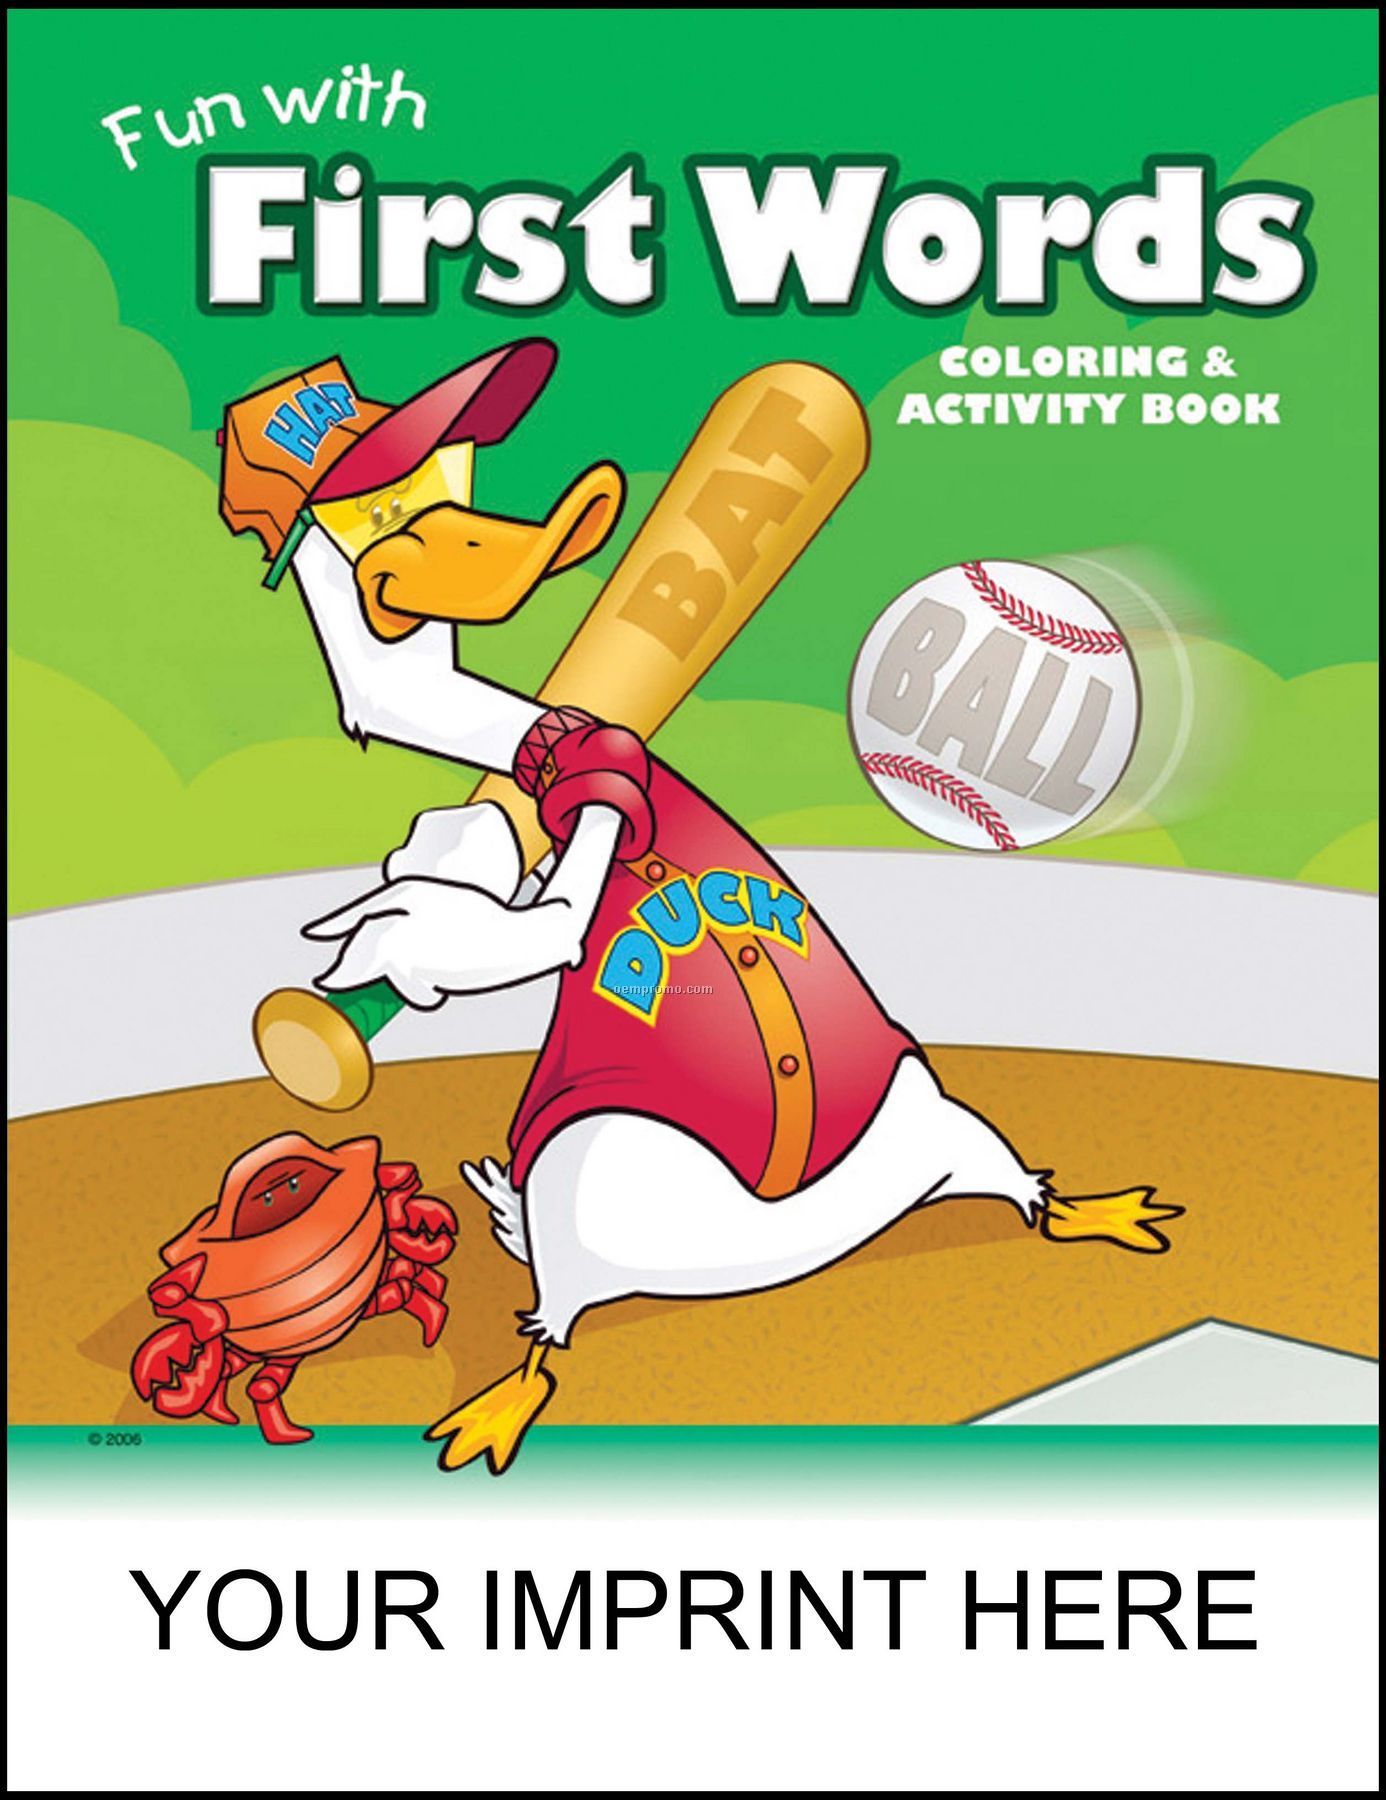 Fun With First Words Coloring & Activity Book